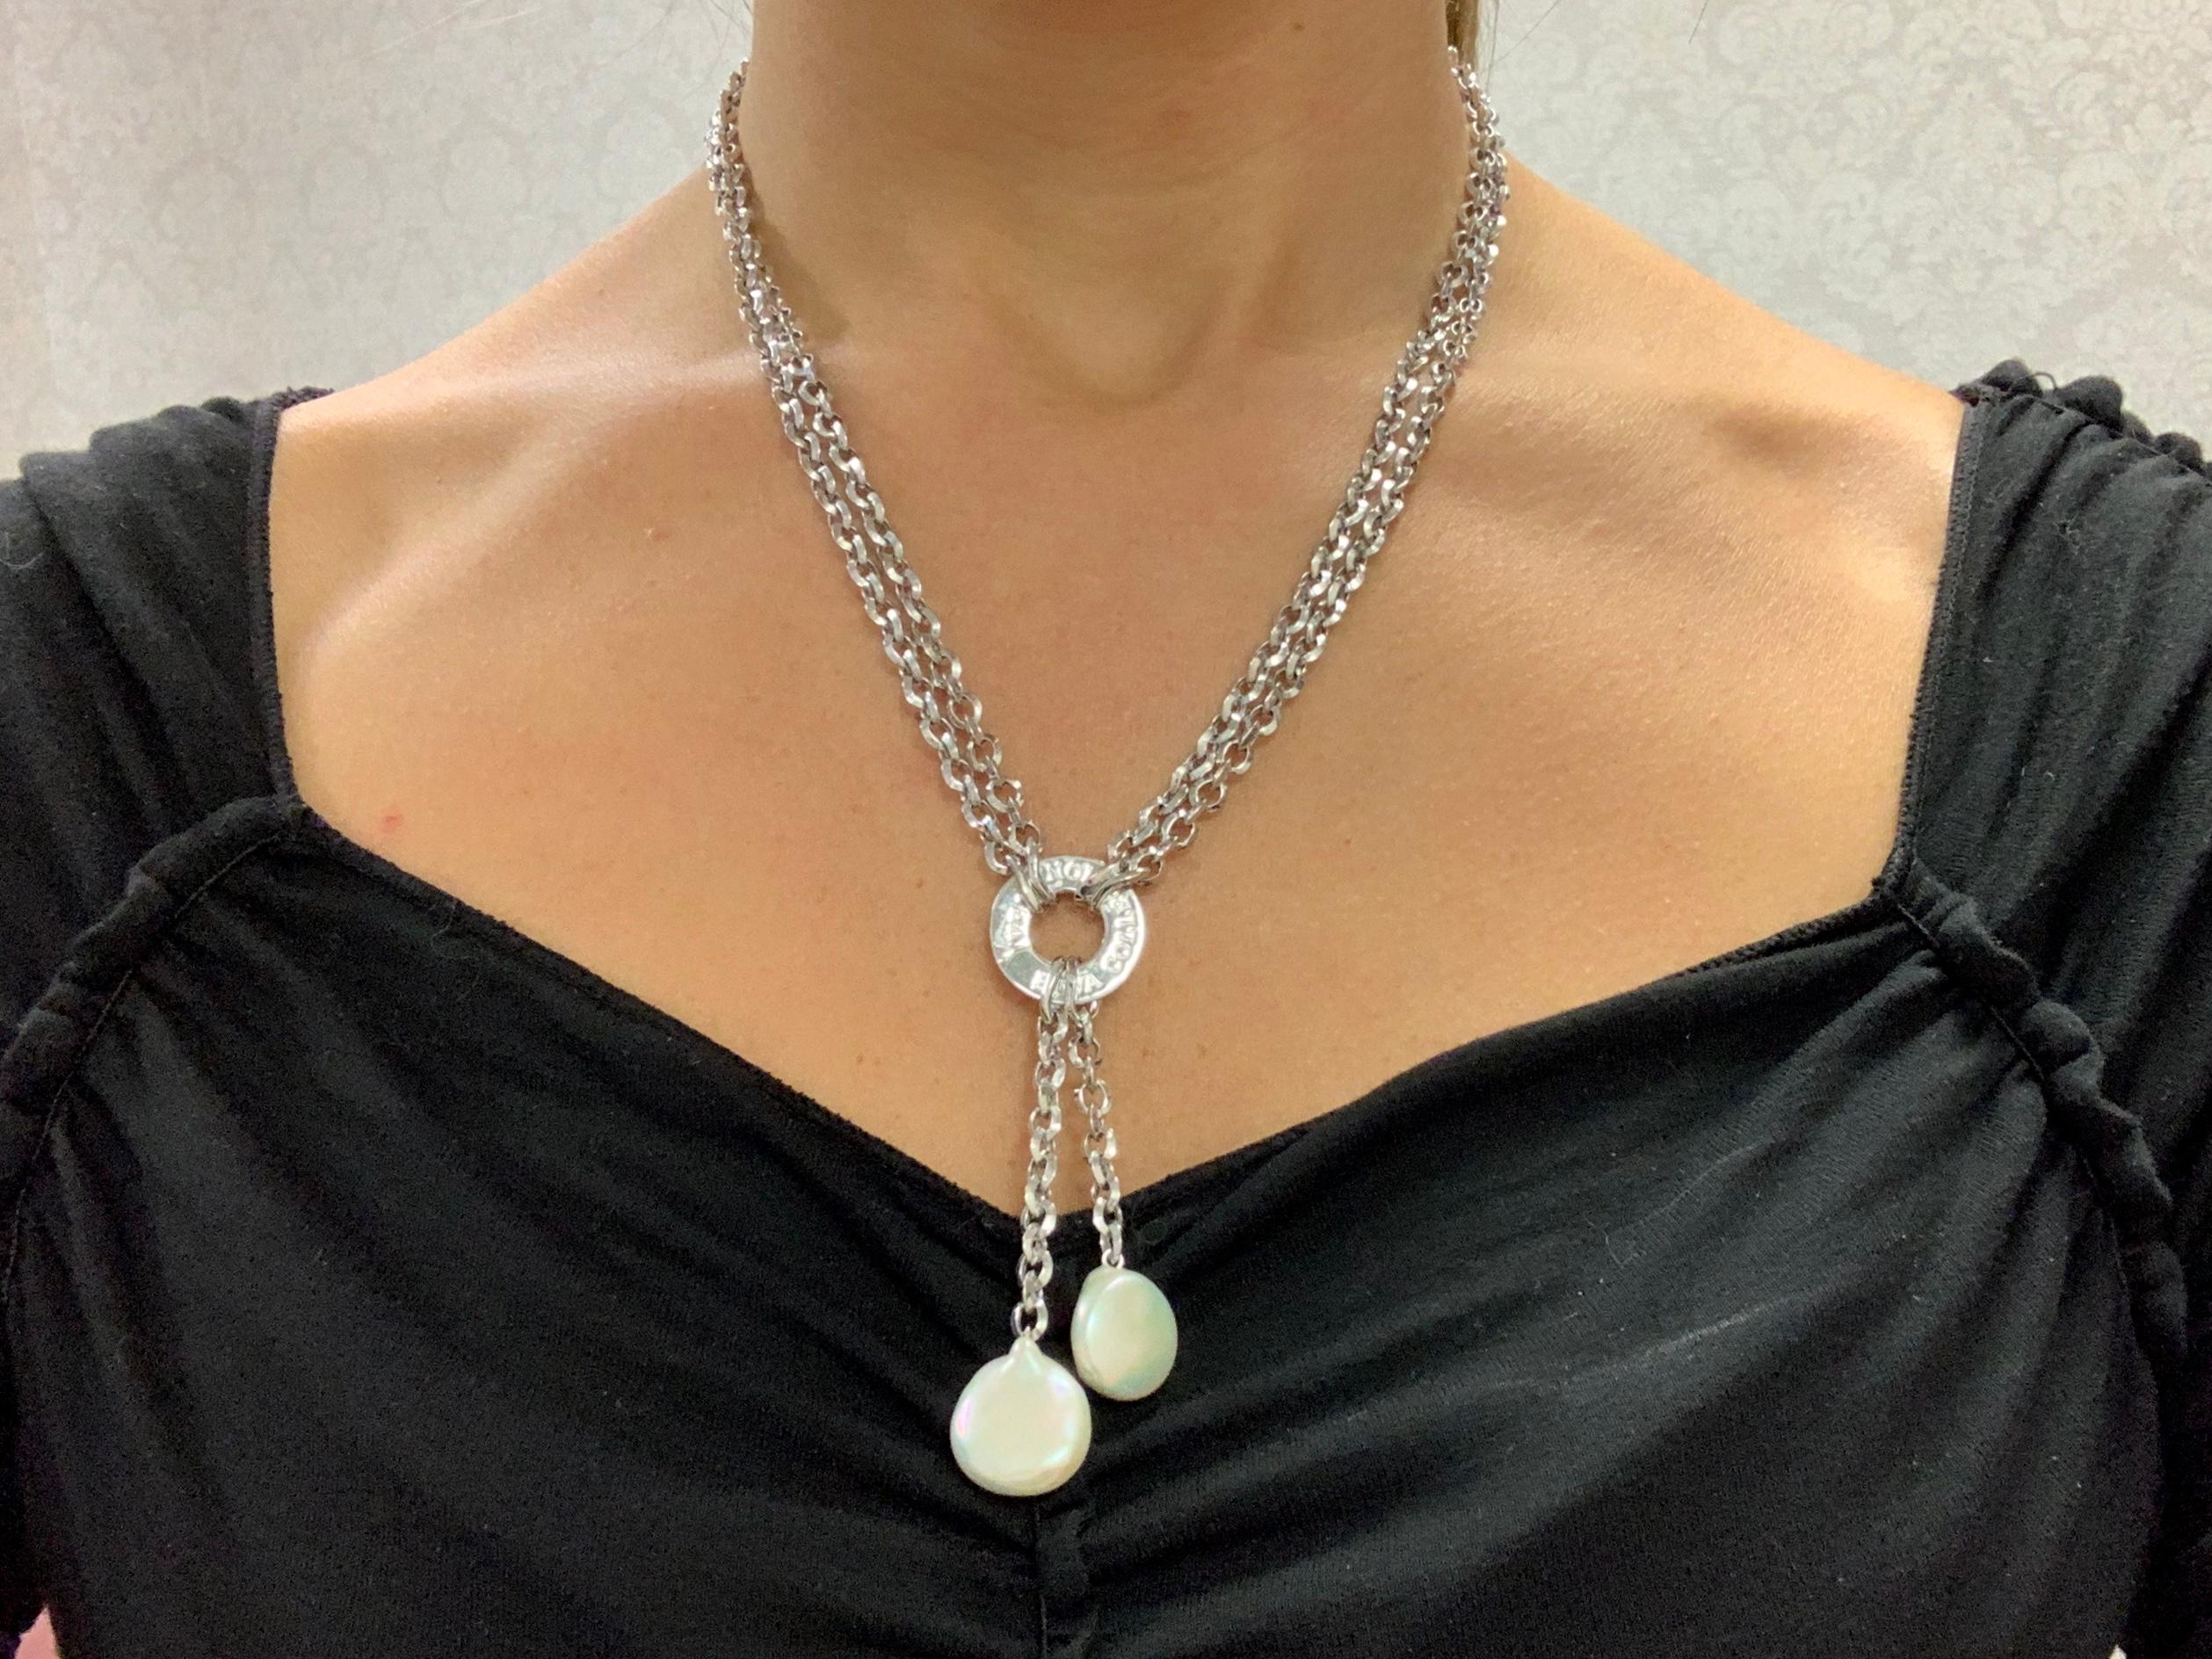 Women's Yvel 18 Karat White Gold Double Chain and Pearl Lariat Necklace For Sale